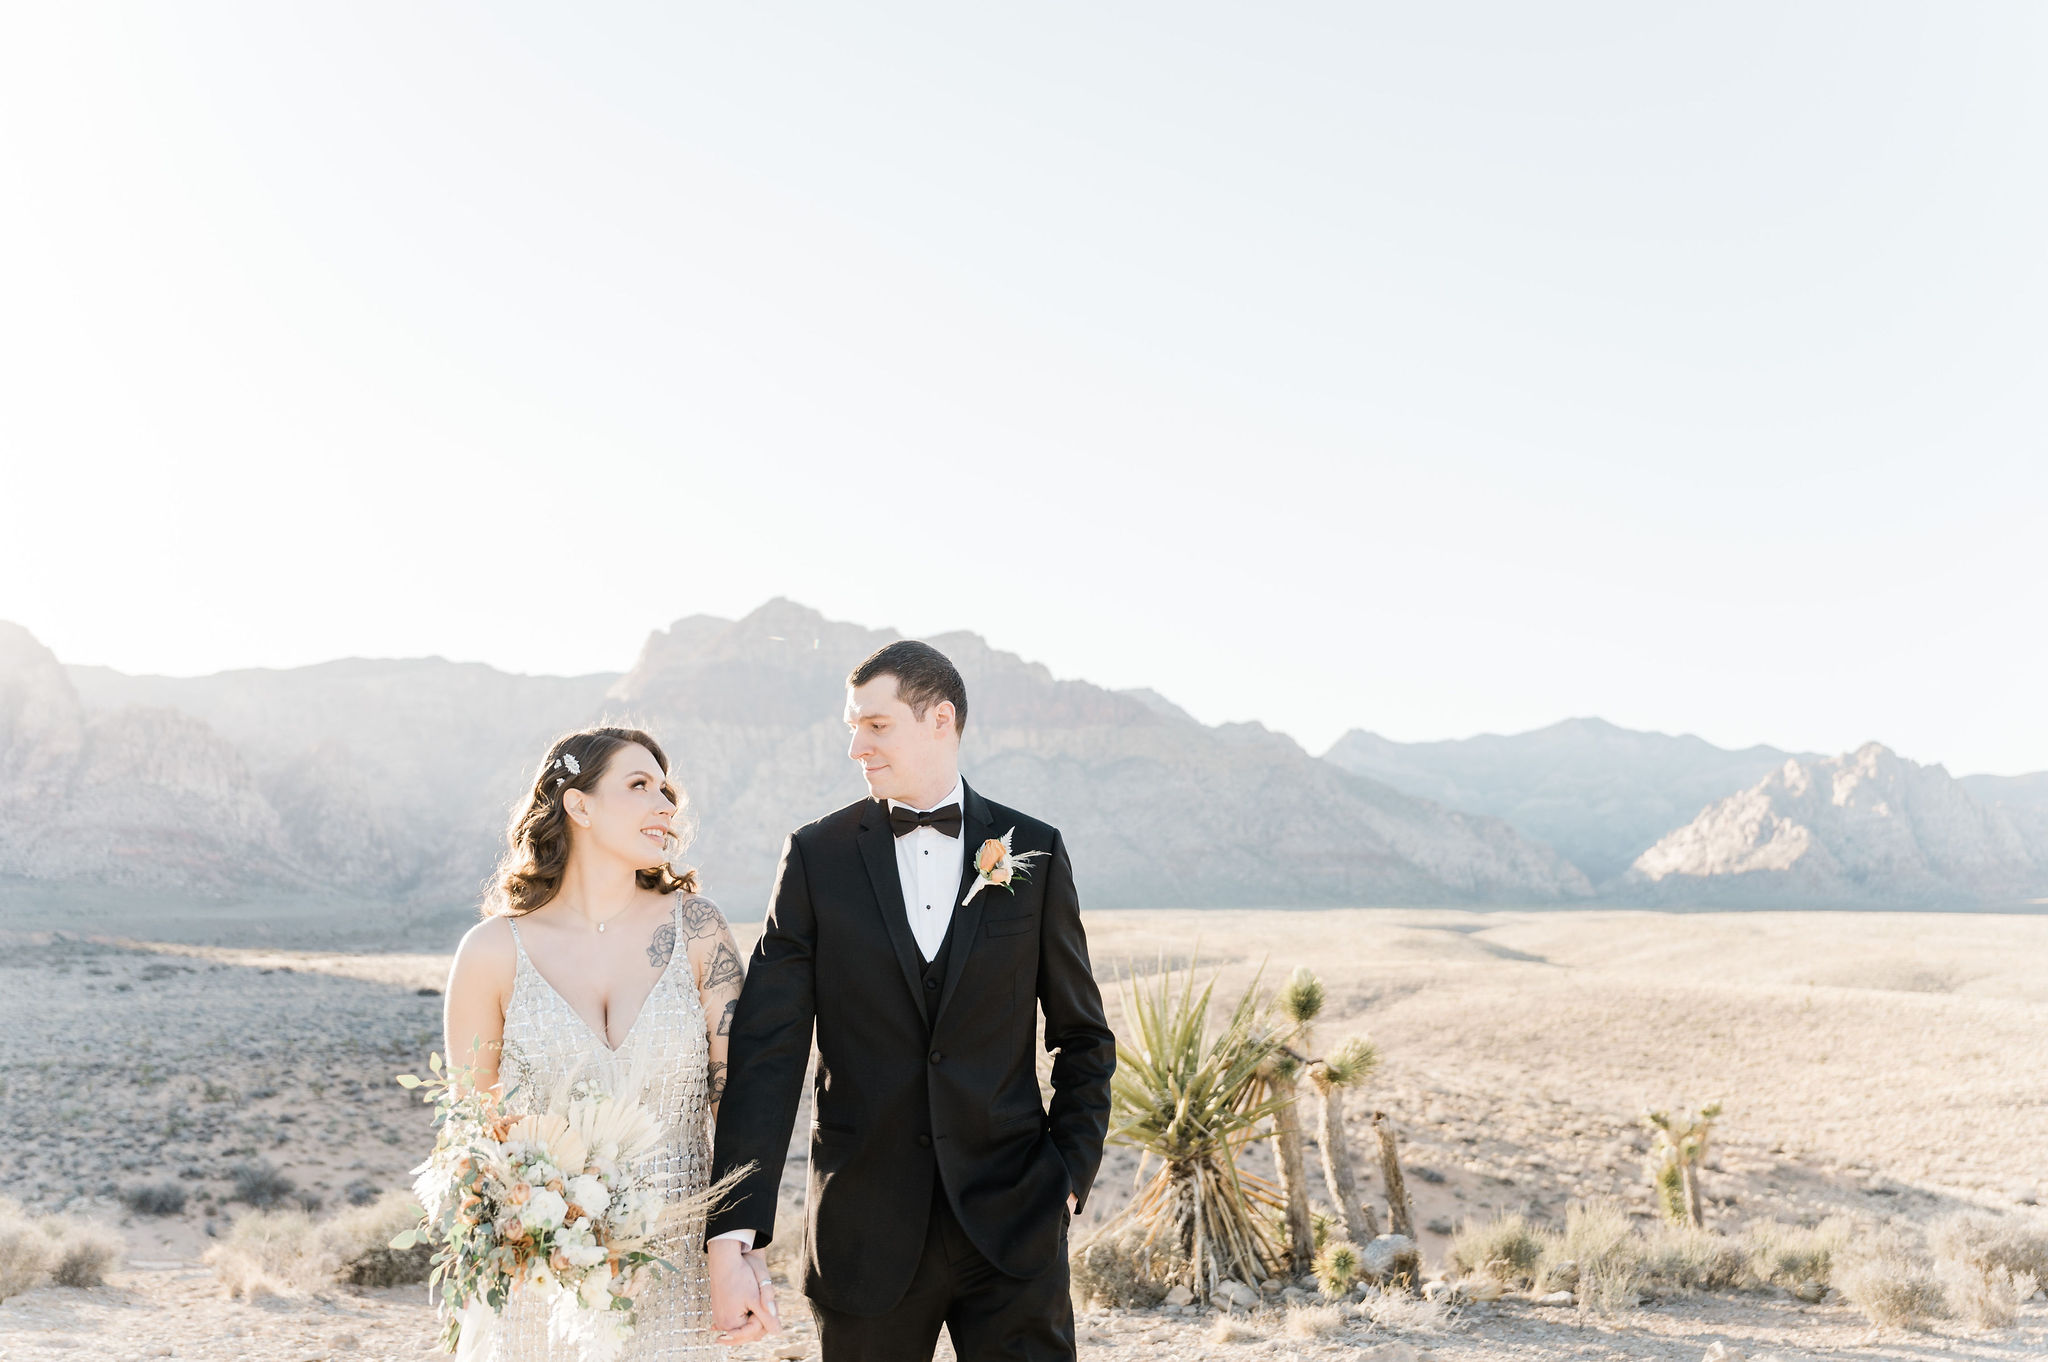 Bride and groom holding hands and looking at each other endearingly during their elopement shoot organized by Elopement Las Vegas